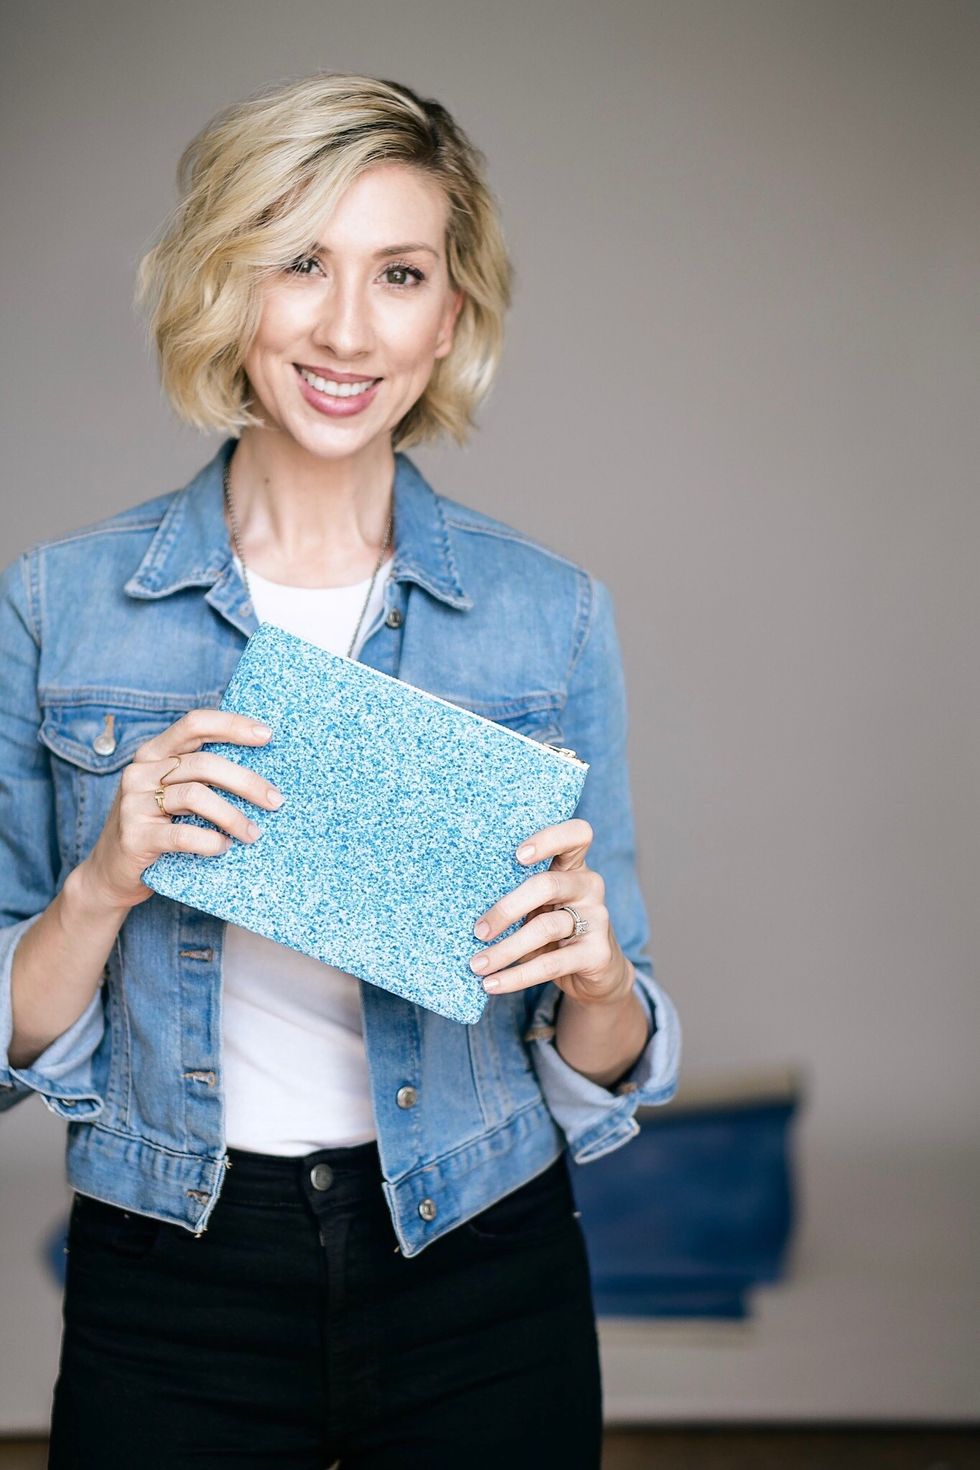 Founder Jennifer Kahn poses with a speckled blue clutch. She has wavy blonde hair and is wearing a denim jacket, white shirt and black pants.